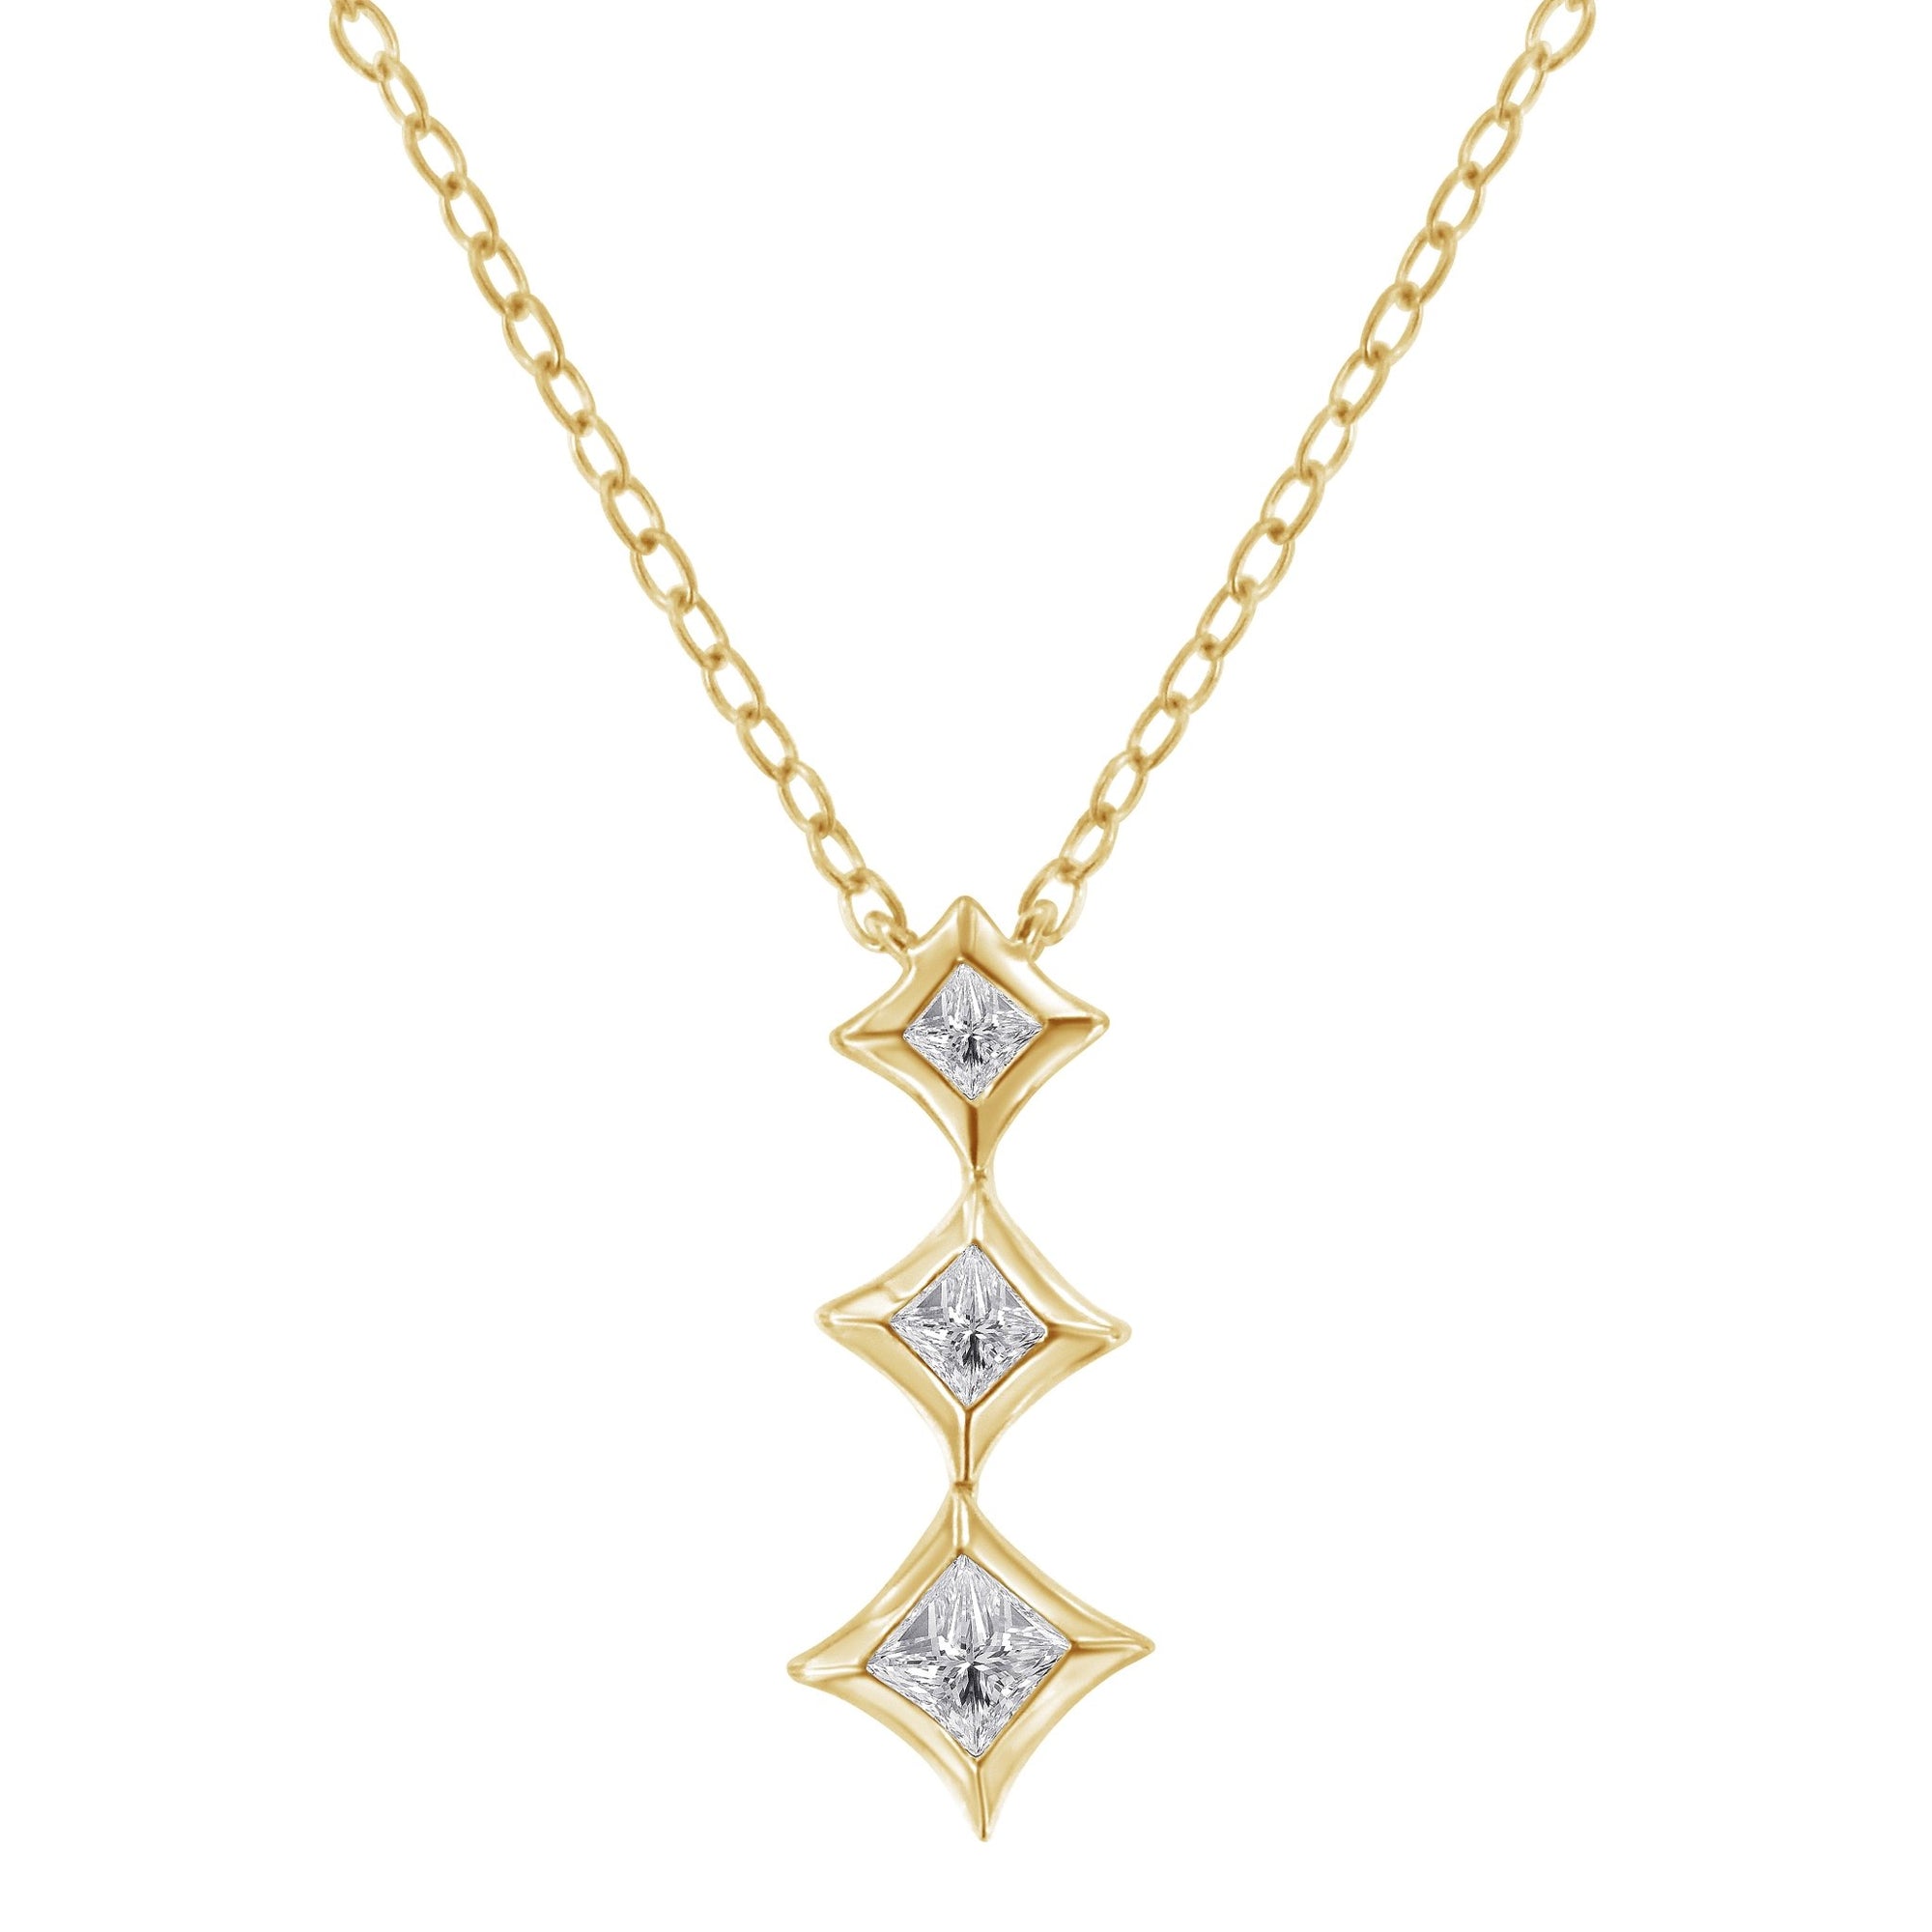 10K White Gold 1/5 Cttw Princess Cut Diamond 3 Stone Drop 18" Pendant Necklace (H-I Color, SI2-I1 Clarity) - LinkagejewelrydesignLinkagejewelrydesign